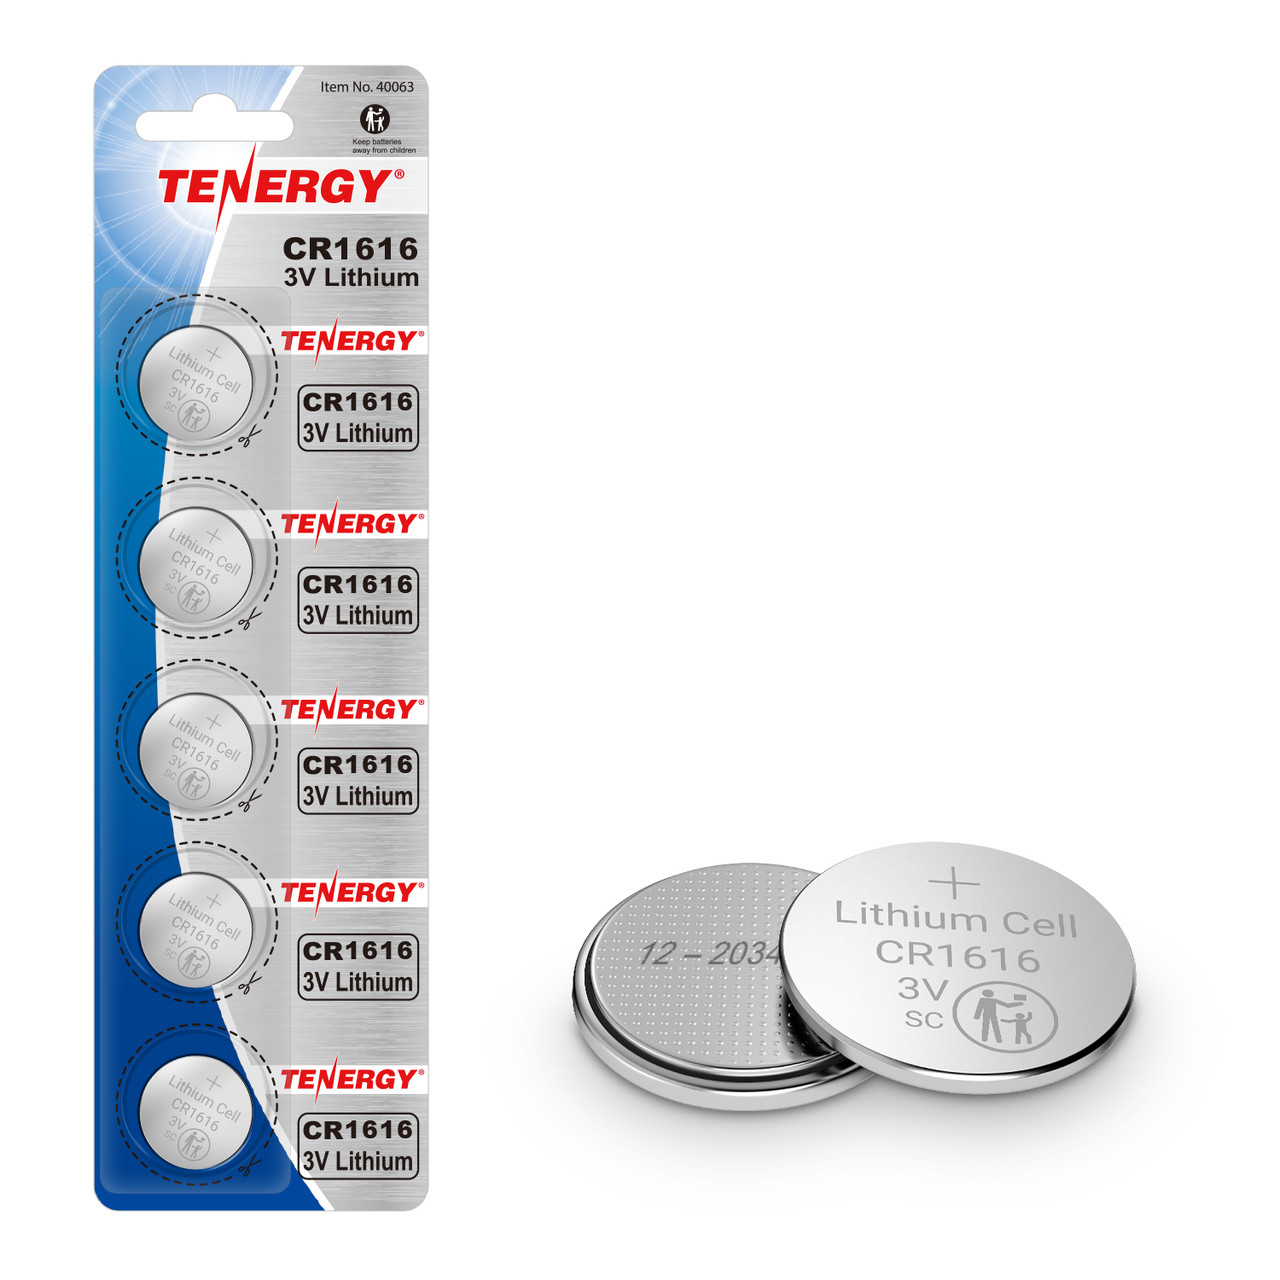 Tenergy CR1616 3V Lithium Button Cells 5 Pack (1 Card)